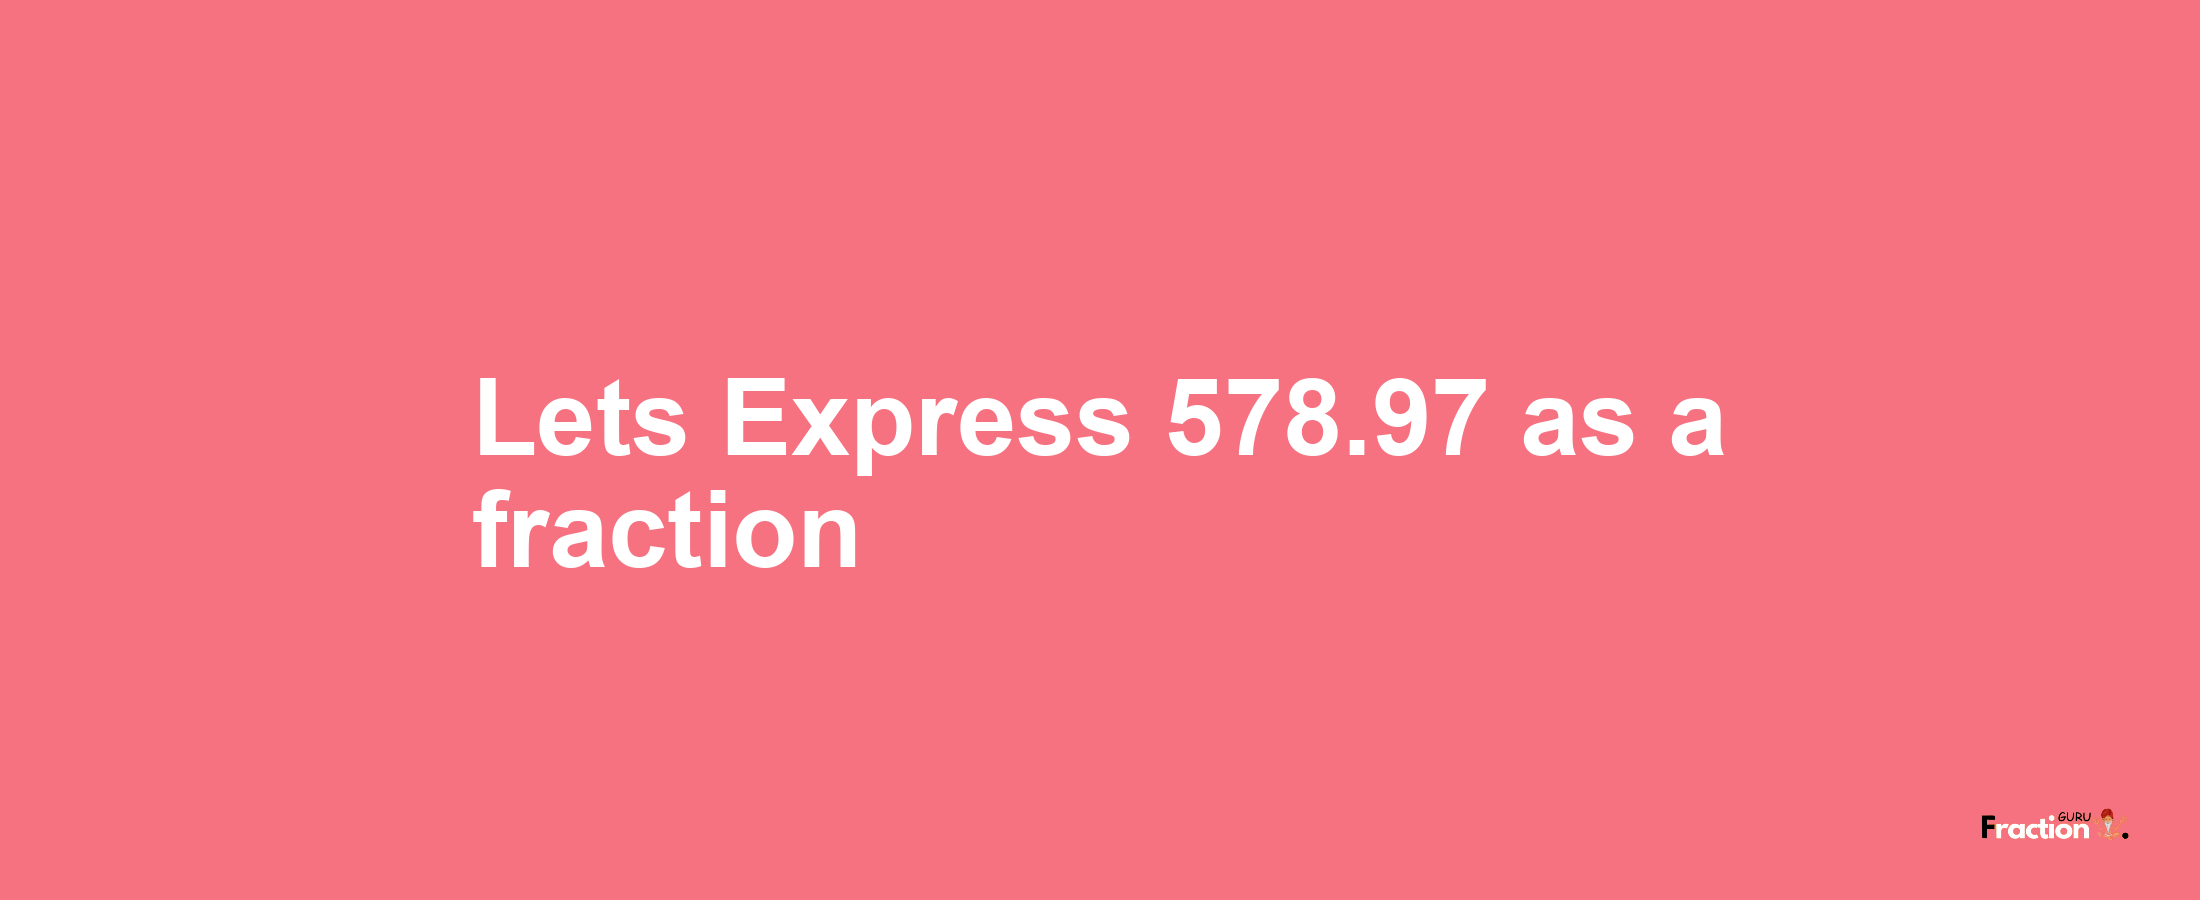 Lets Express 578.97 as afraction